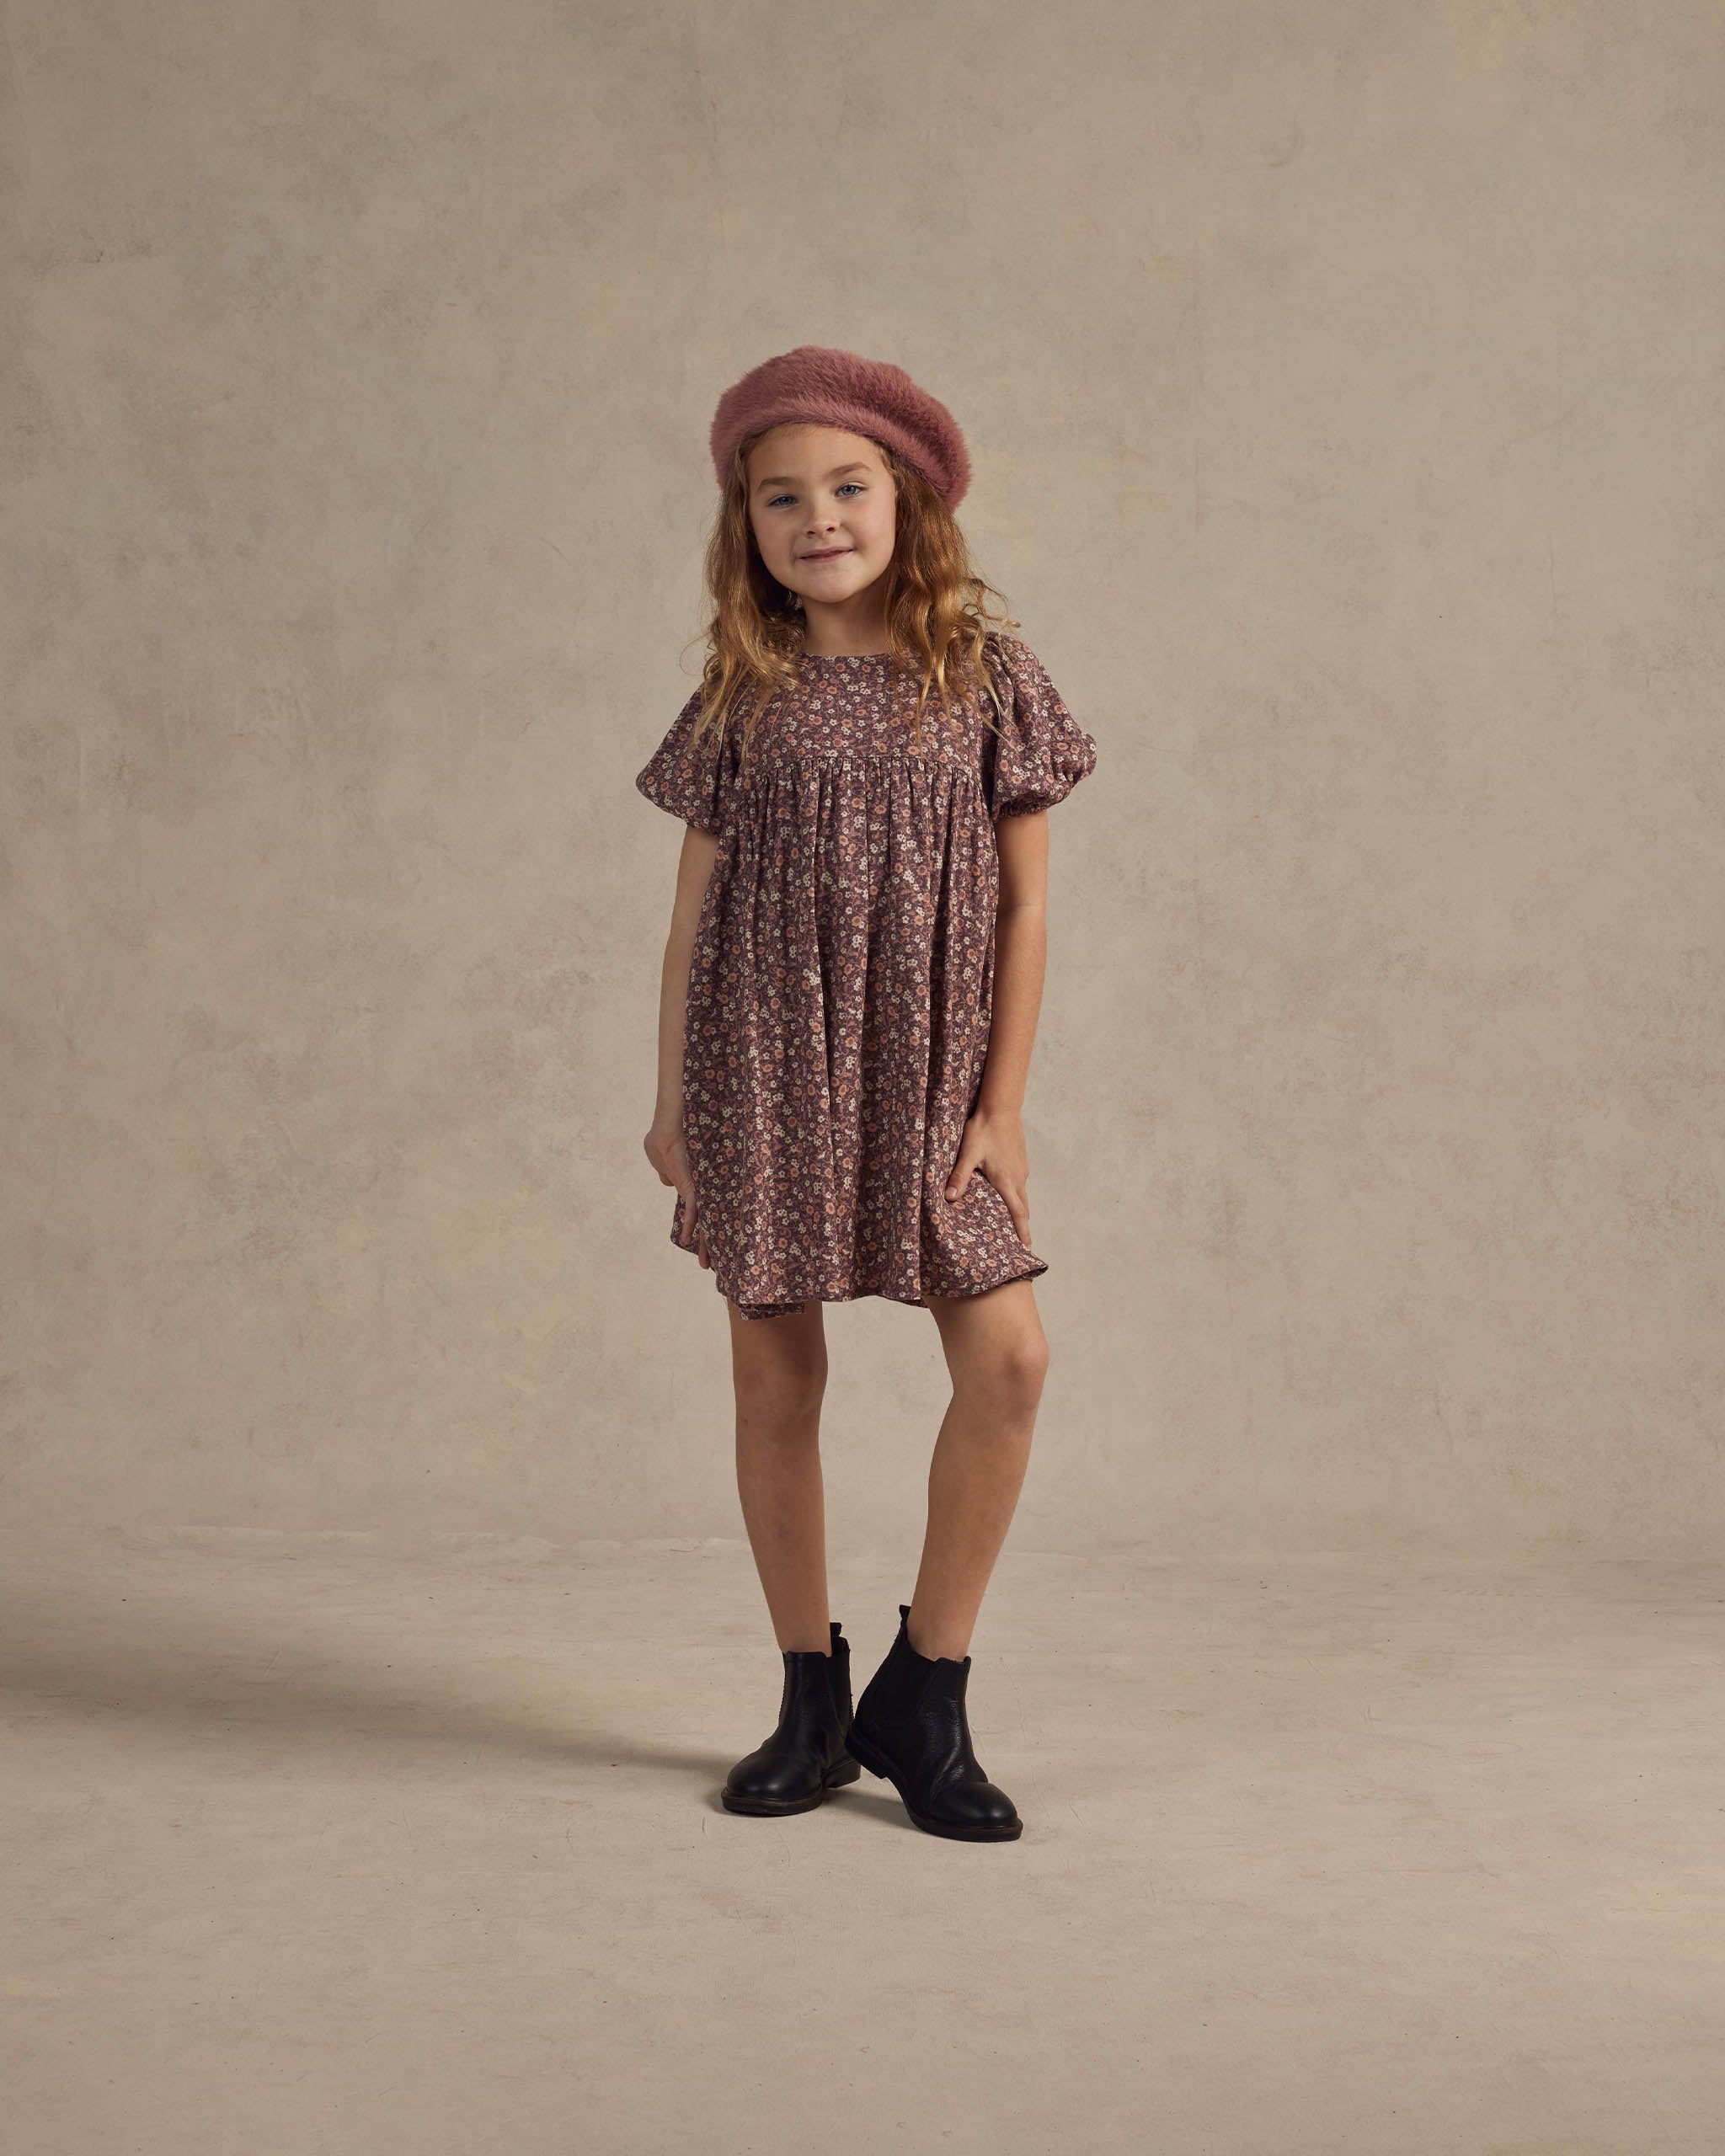 Beret || Raspberry - Rylee + Cru | Kids Clothes | Trendy Baby Clothes | Modern Infant Outfits |